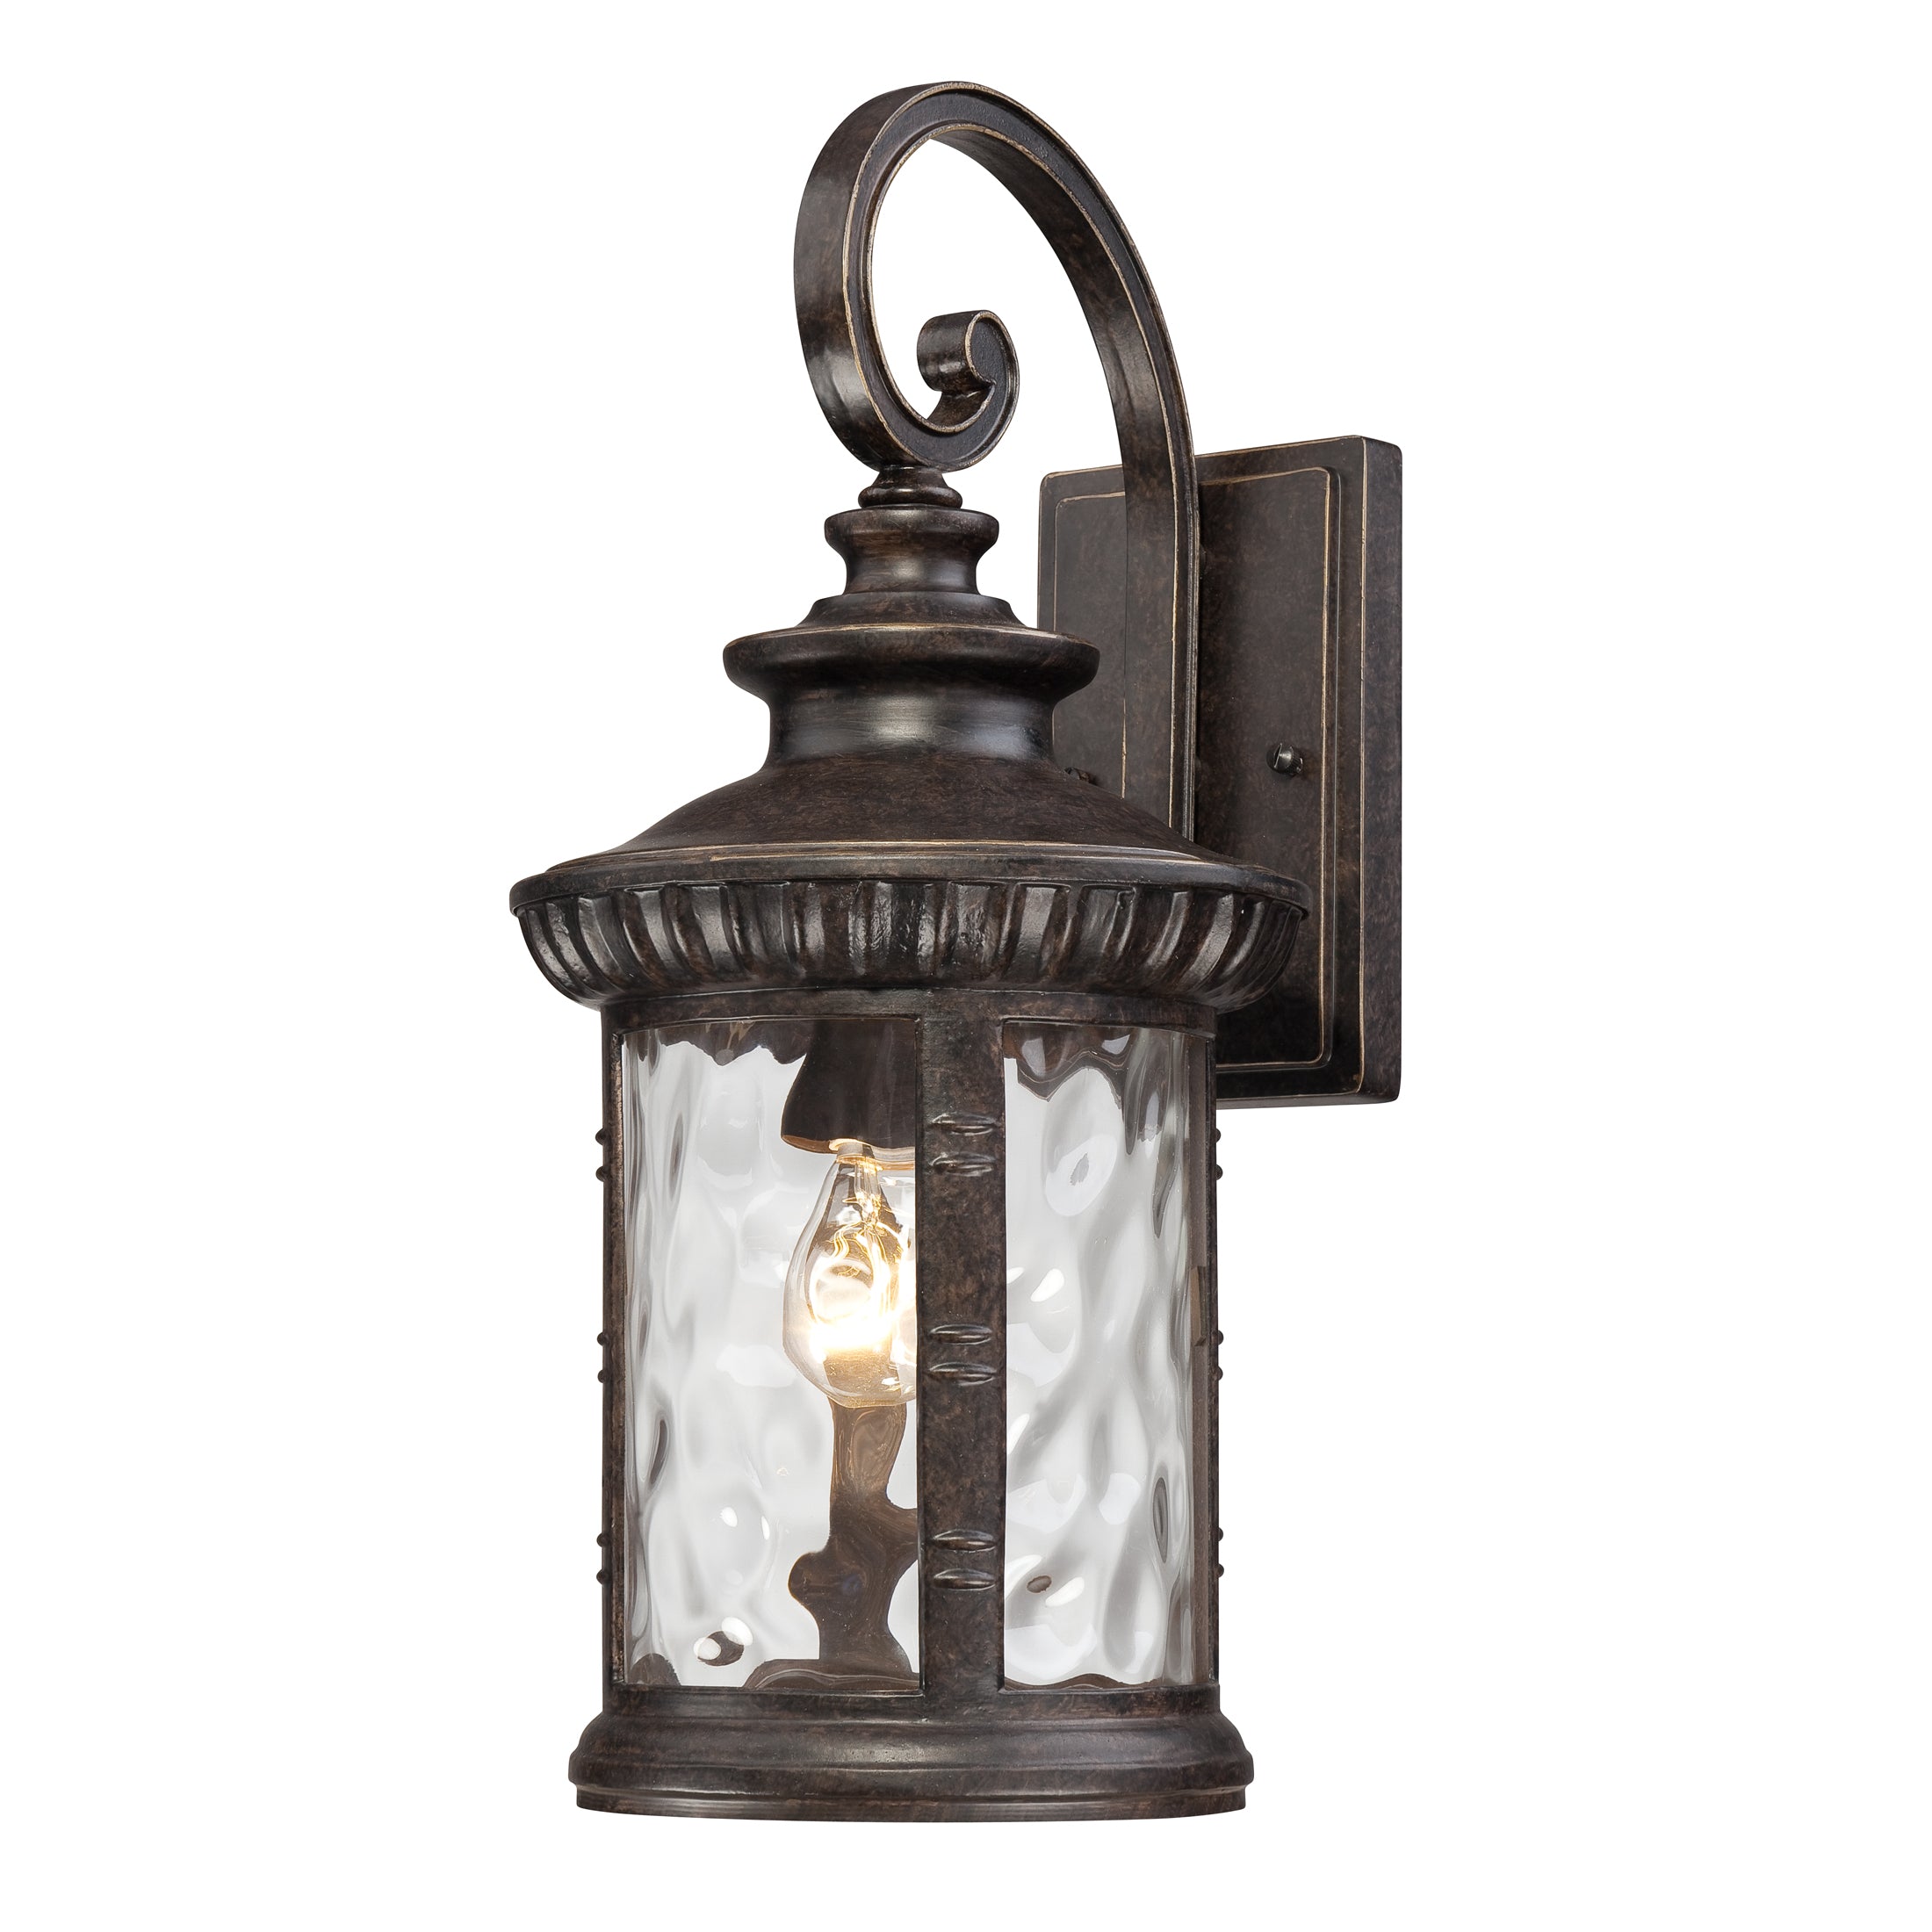 Chimera Outdoor Wall Light Imperial Bronze